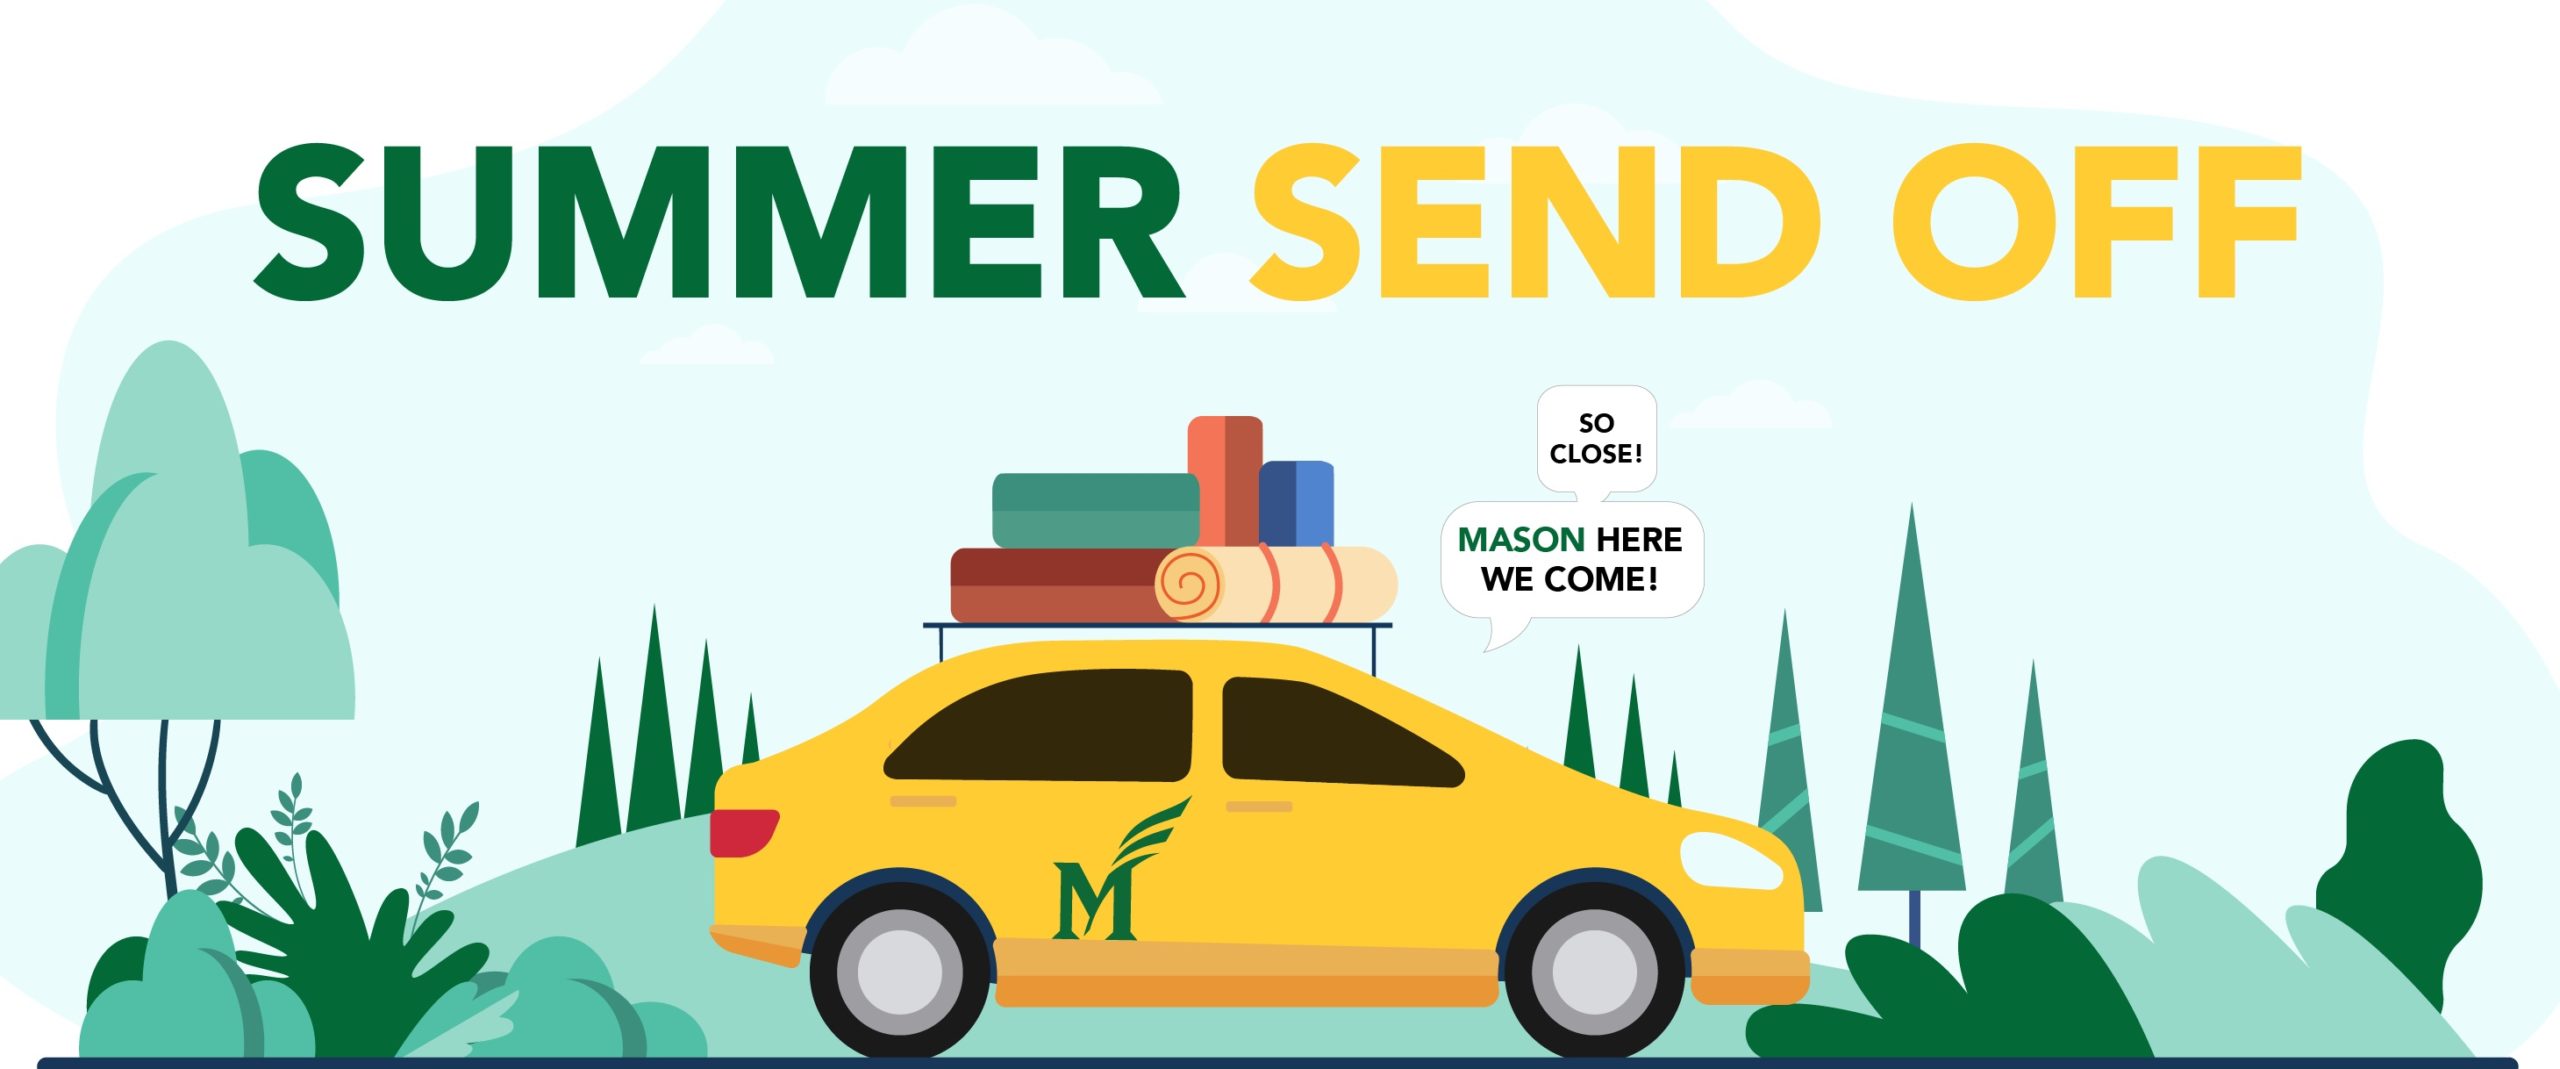 Summer Send Off banner. An illustration of a yellow car with a Mason M logo and luggage on top driving past some green trees and other vegetation. Voice bubbles saying 'so close!' and 'Mason here we come!' are coming from the car